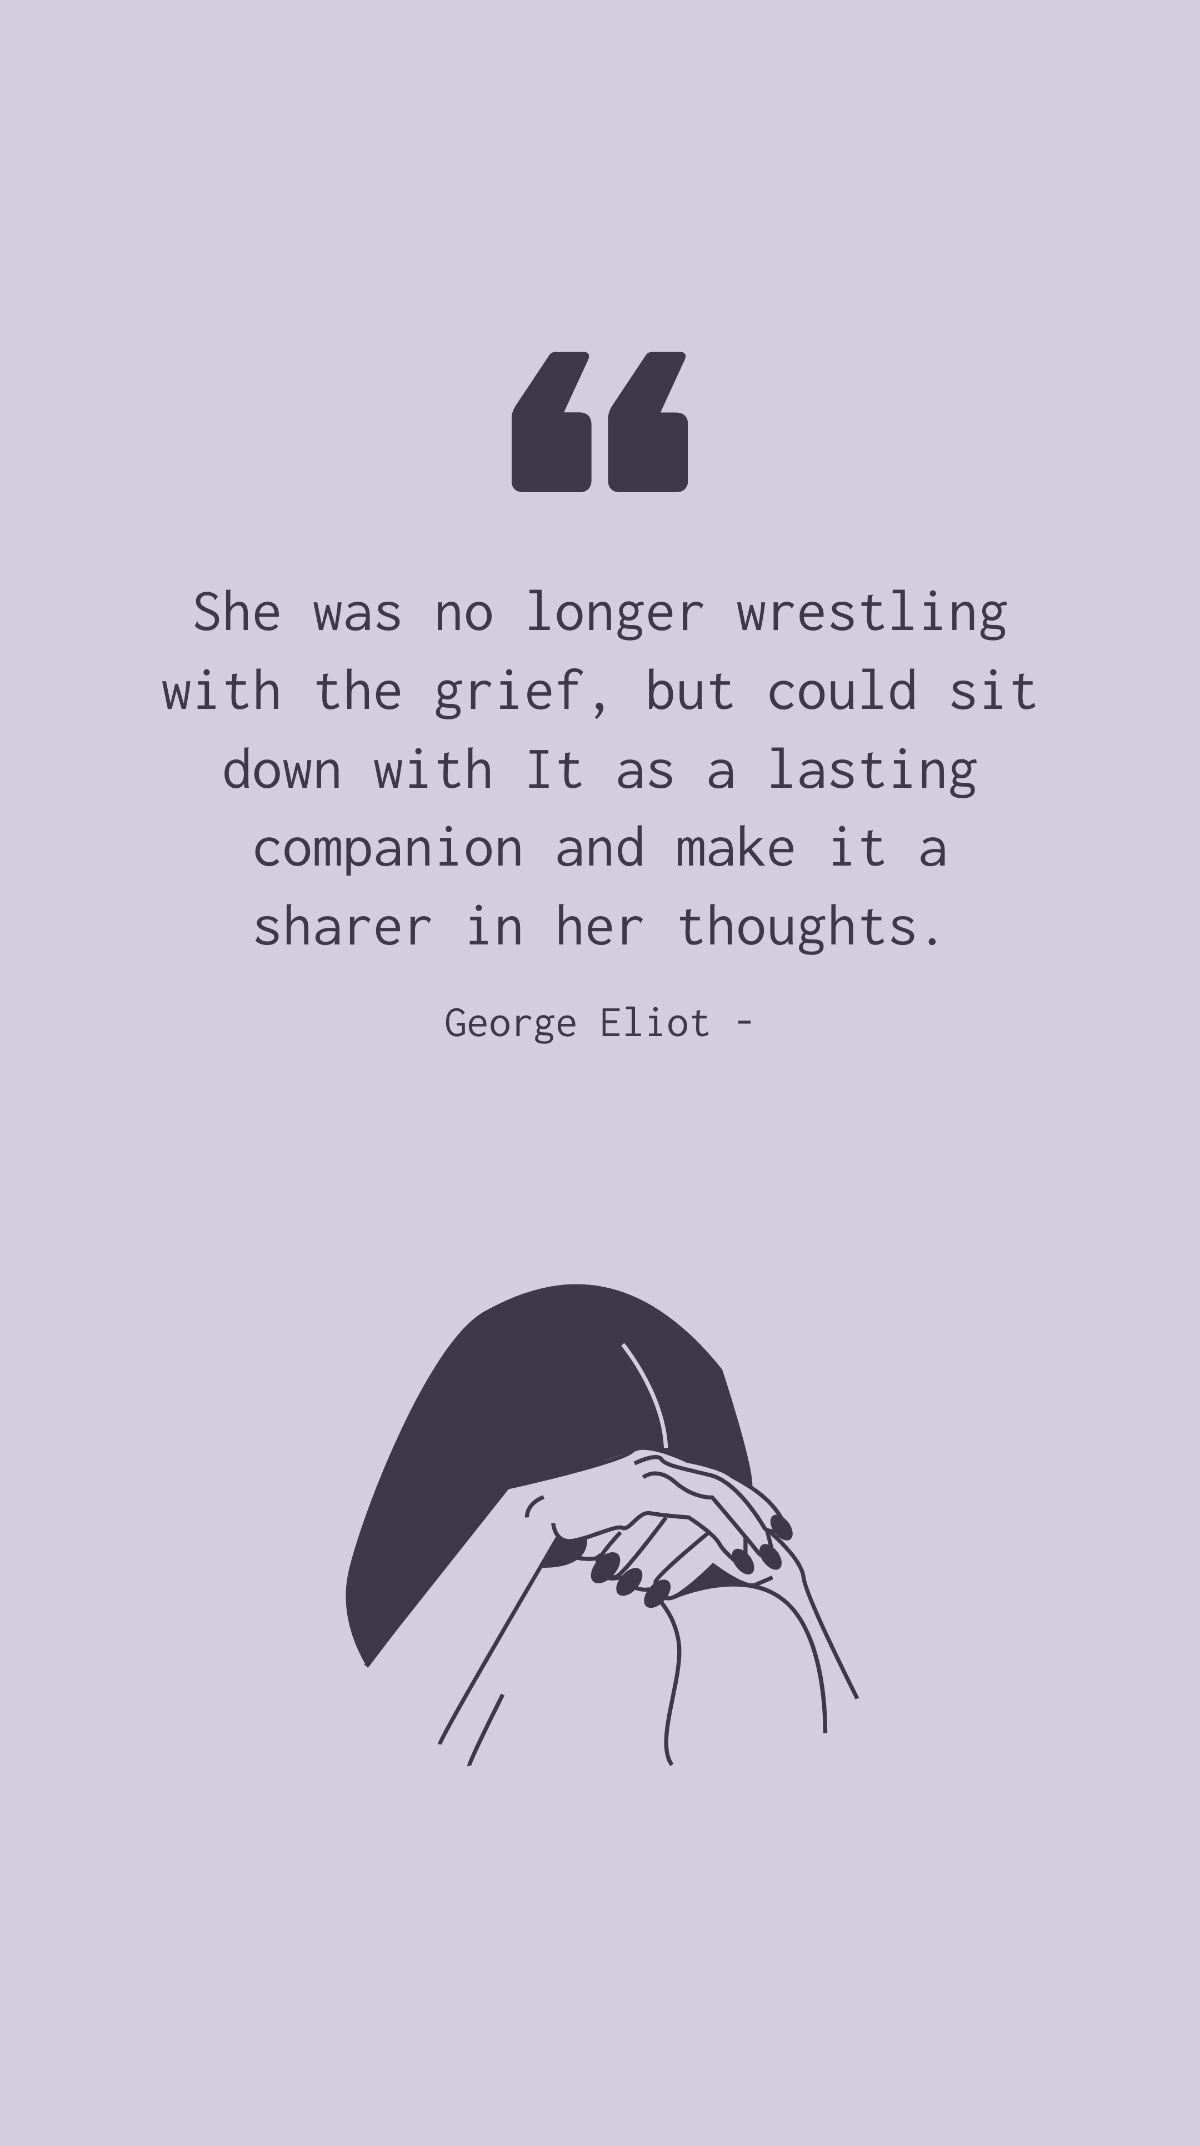 George Eliot - She was no longer wrestling with the grief, but could sit down with It as a lasting companion and make it a sharer in her thoughts. Template